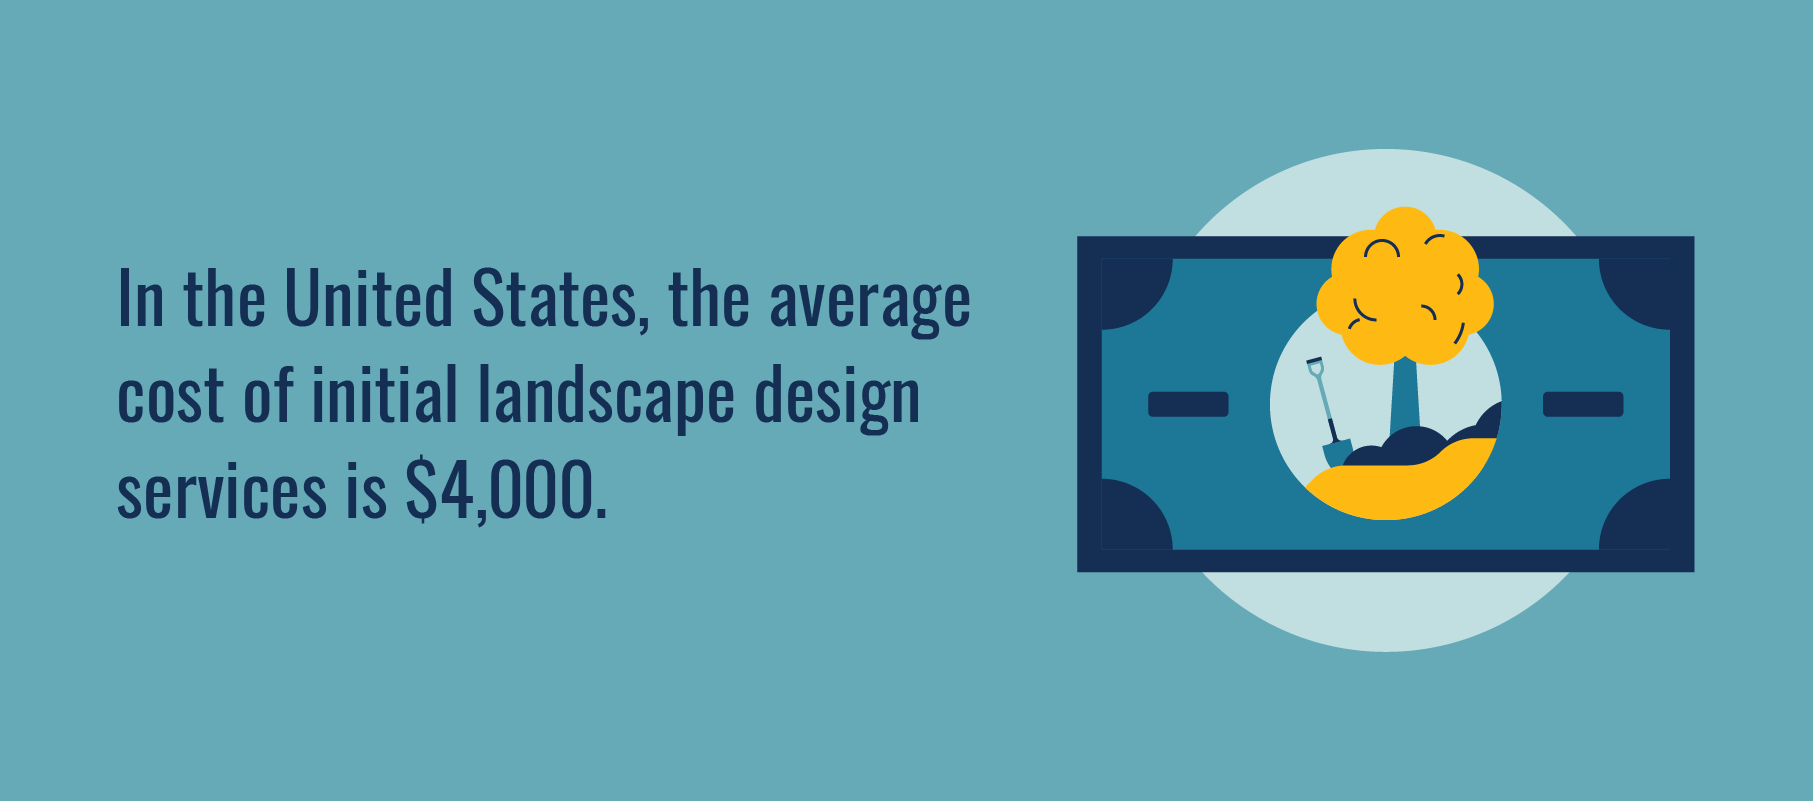 the average cost of initial landscape design services